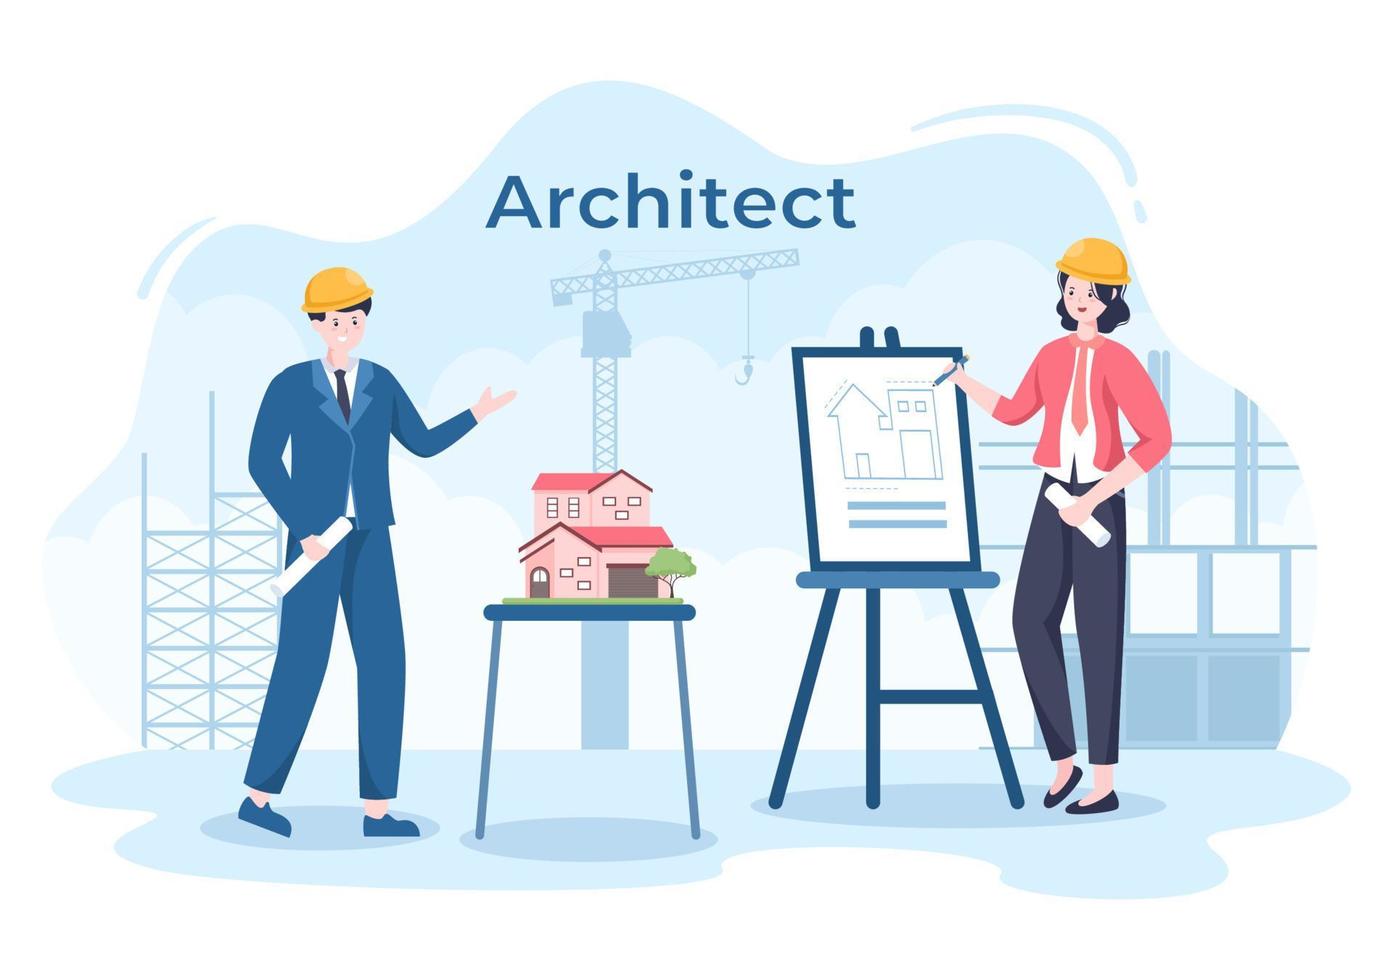 Architect or Engineer Cartoon Illustration using a Multipurpose Board Table to Sketch Building Constructions and Project Miniatures Concept vector